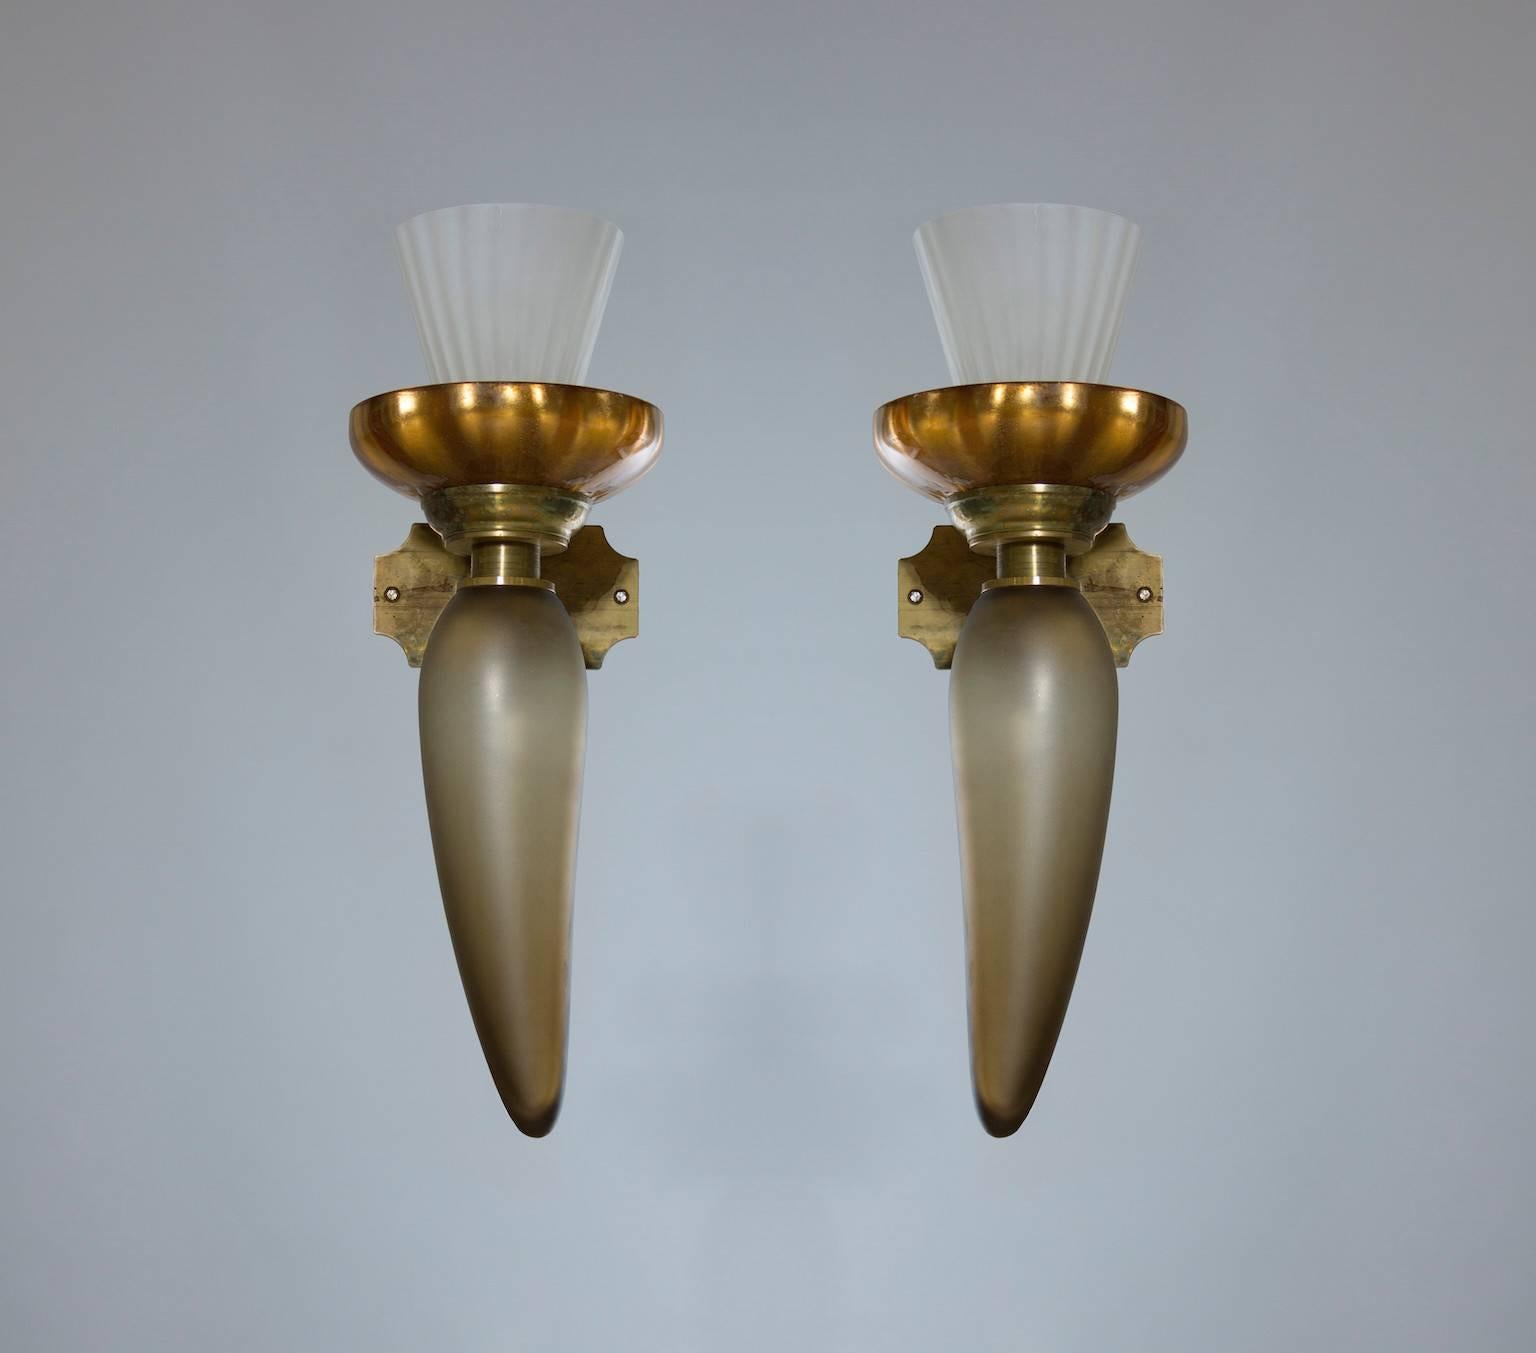 Elegant, Italian Venetian, Pair of Sconces, Blown Murano Glass, Brass, Gold, Sand, 1950s.
This is a pair of sconces, that is a unique masterpiece. The sconces are entirely handcrafted in blown Murano Glass, in the Venetian Murano island. 
They are